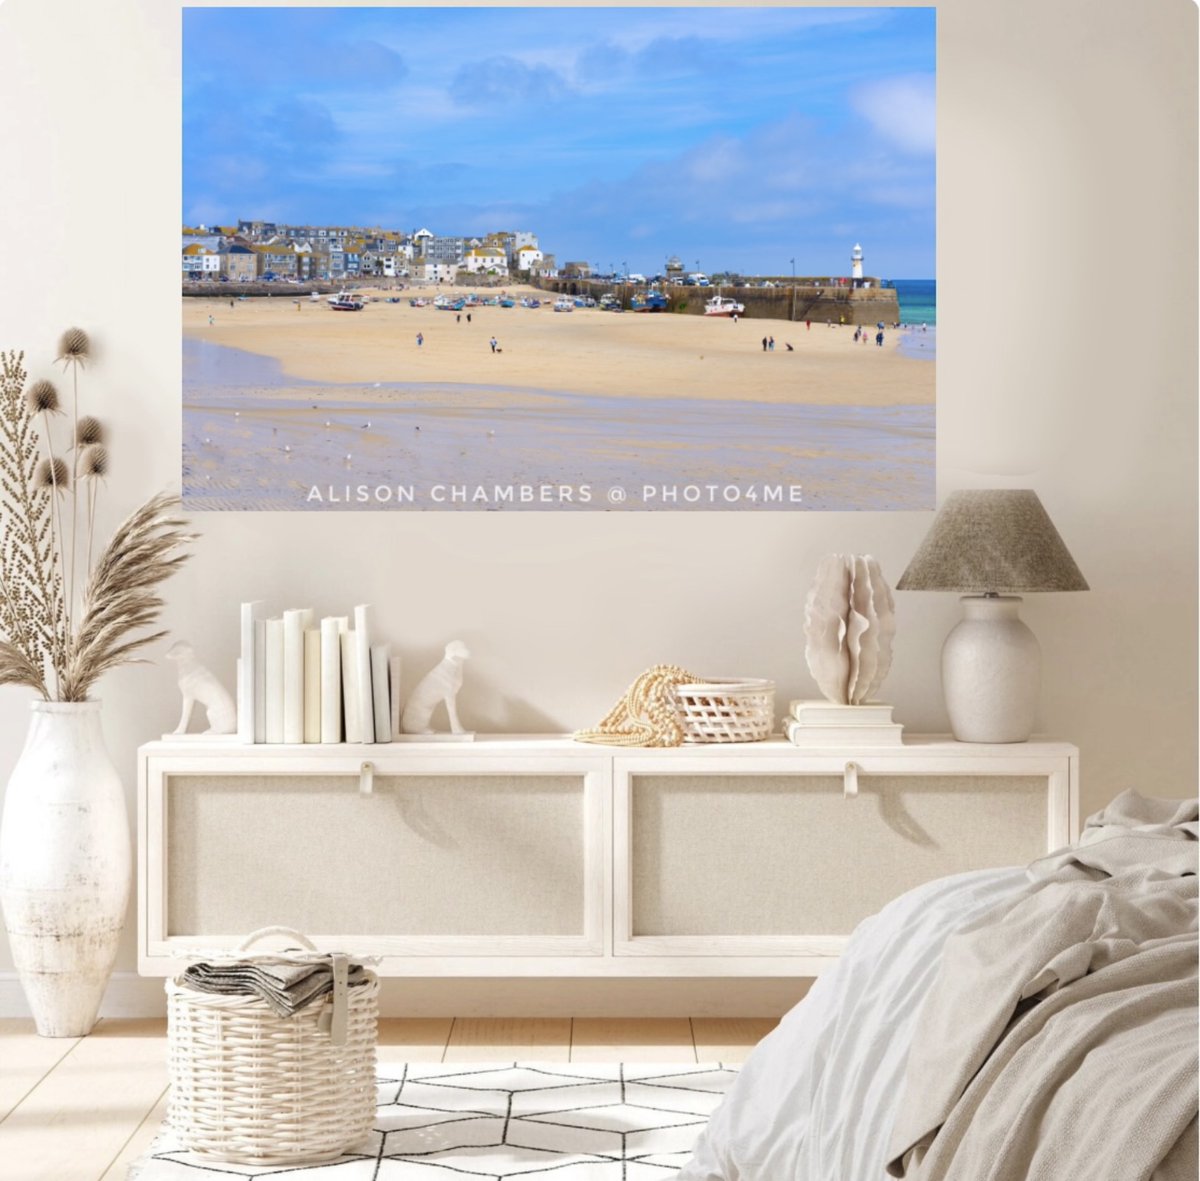 St Ives Cornwall. Available from; shop.photo4me.com/1331356 & redbubble.com/161156792 & 2-alison-chambers.pixels.com #stives #stivescornwall #stivesharbour #cornwall #cornish #cornishcoast #photo4me #redbubble #fineartamerica